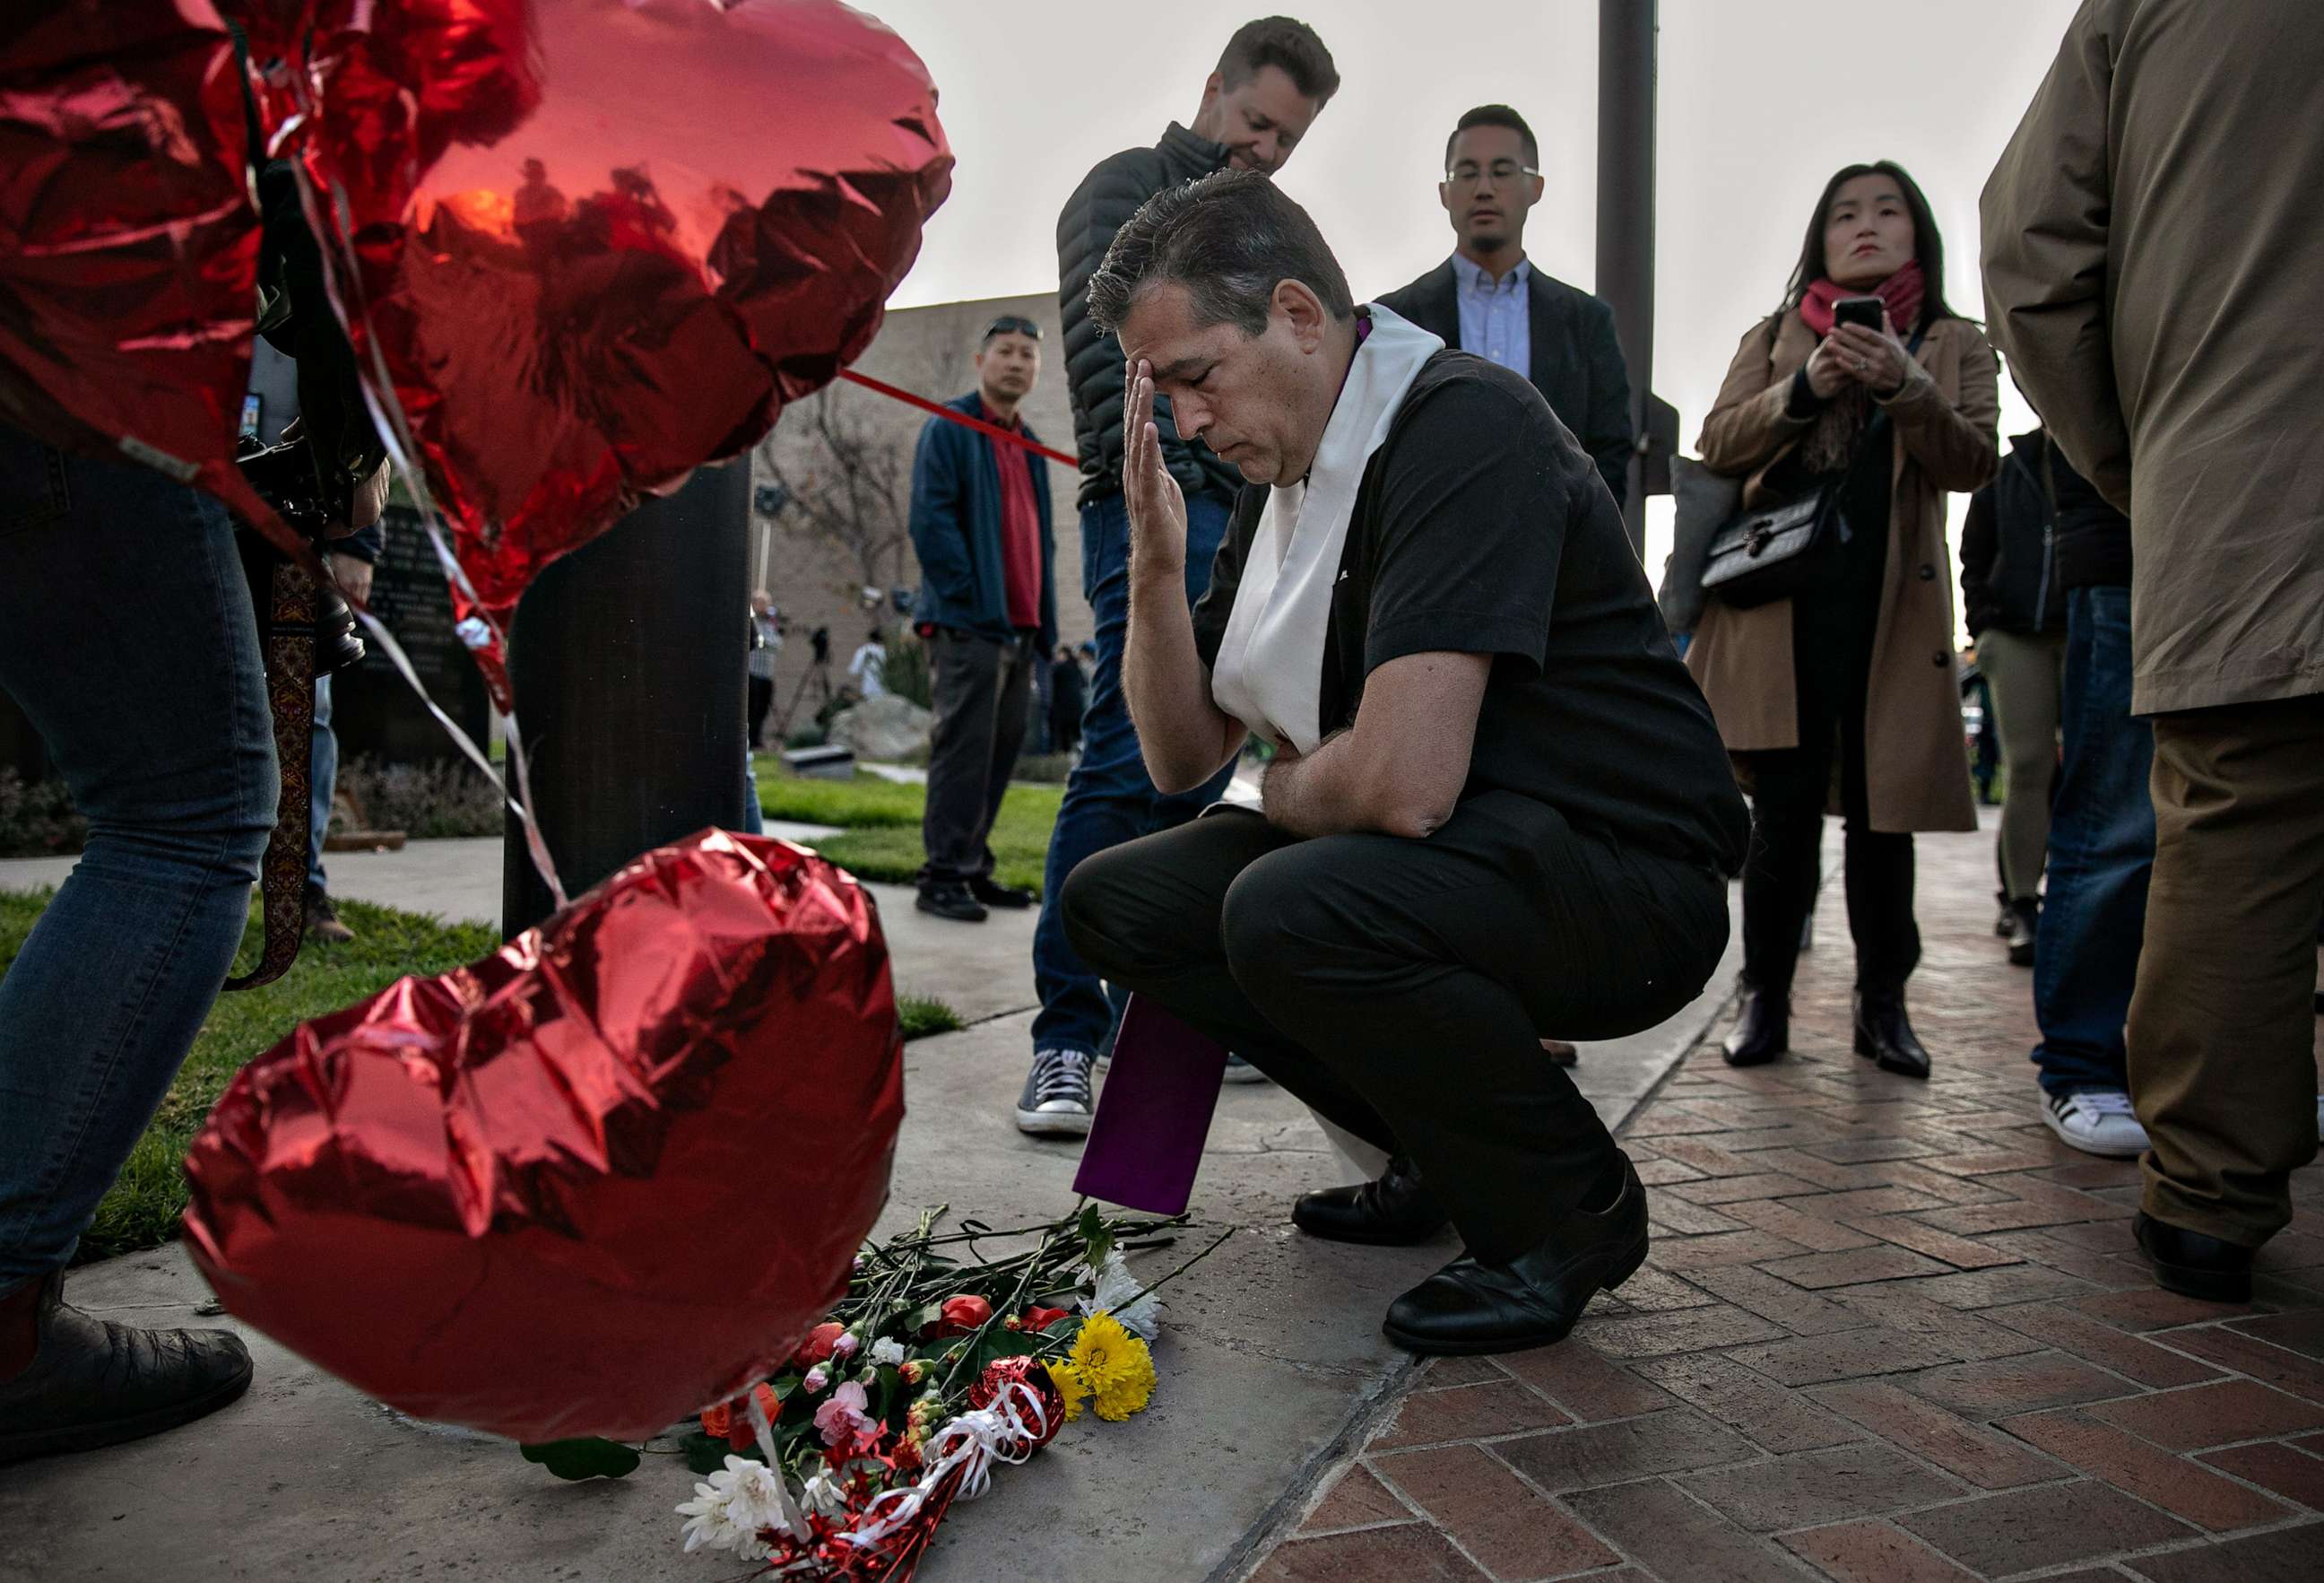 PHOTO: A faith leader says a prayer after placing flowers at a memorial for the people who were killed by a gunman at a ballroom dance studio, Jan. 22, 2023, in Monterey Park, Calif.